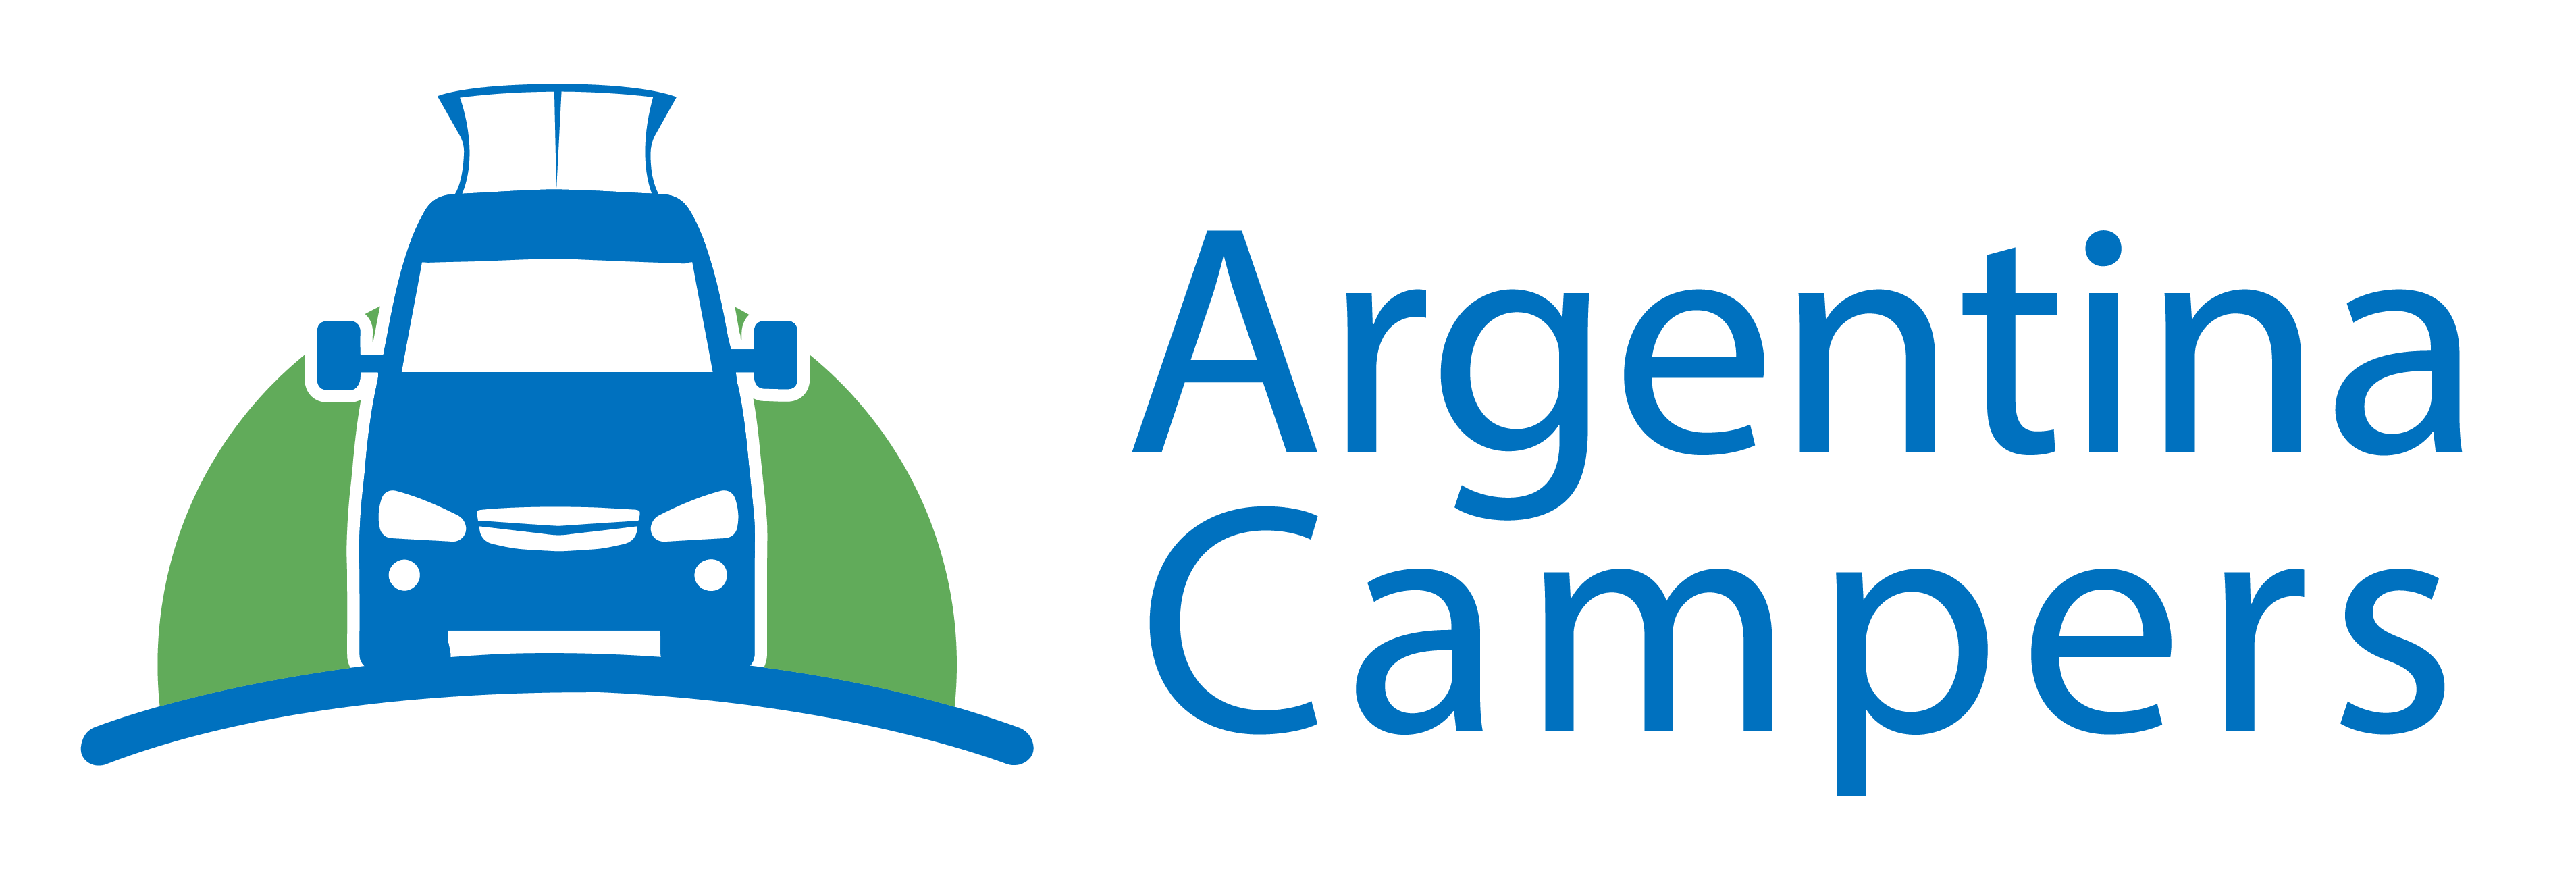 Explore with Argentina campers Rental